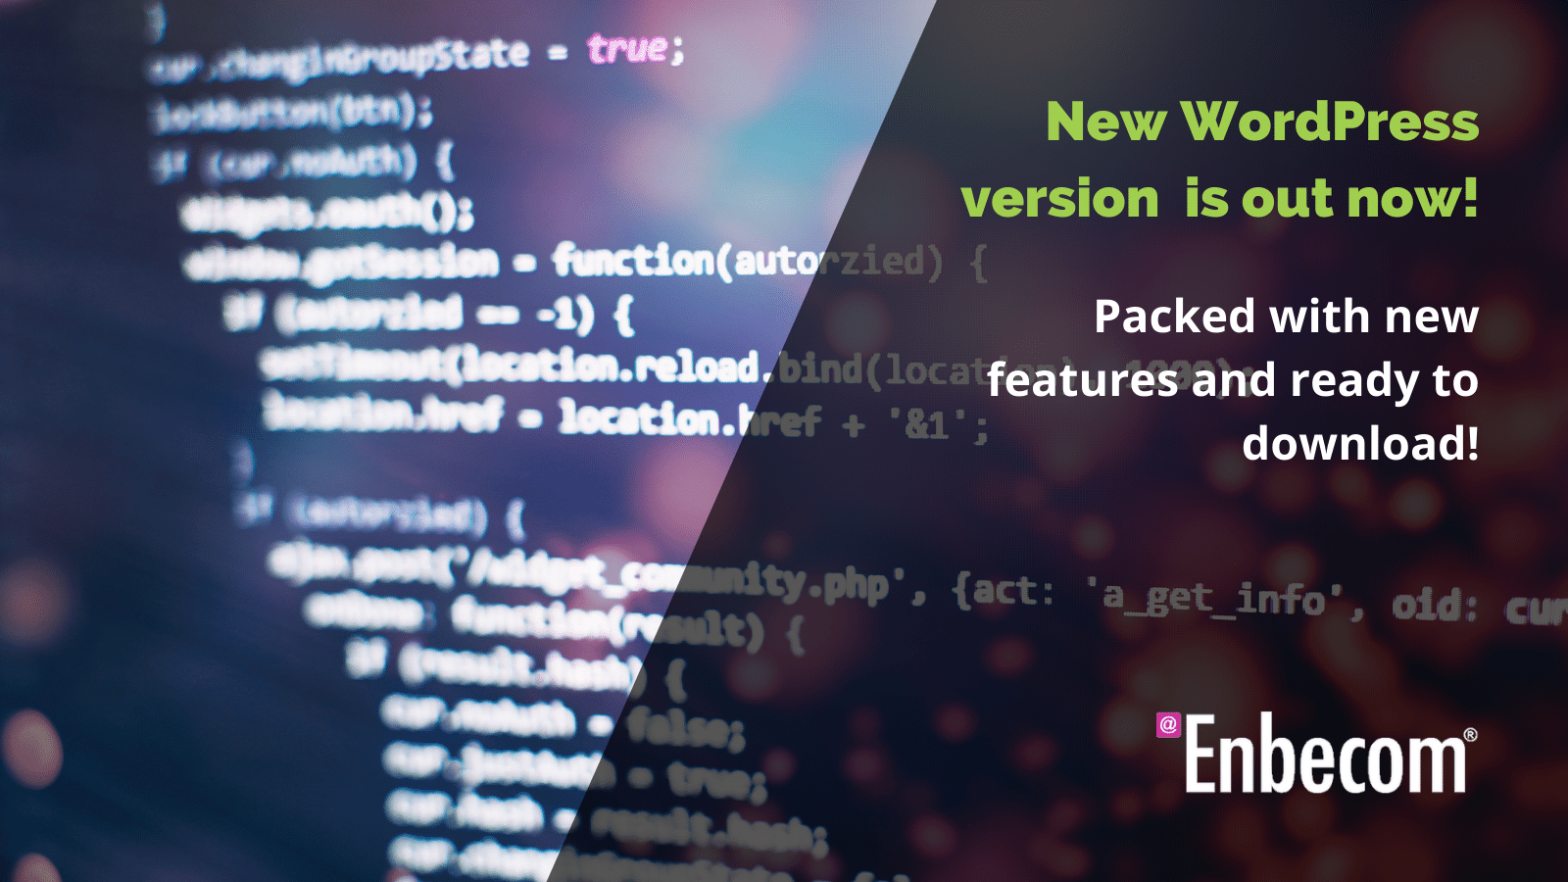 New WordPress version is out now!